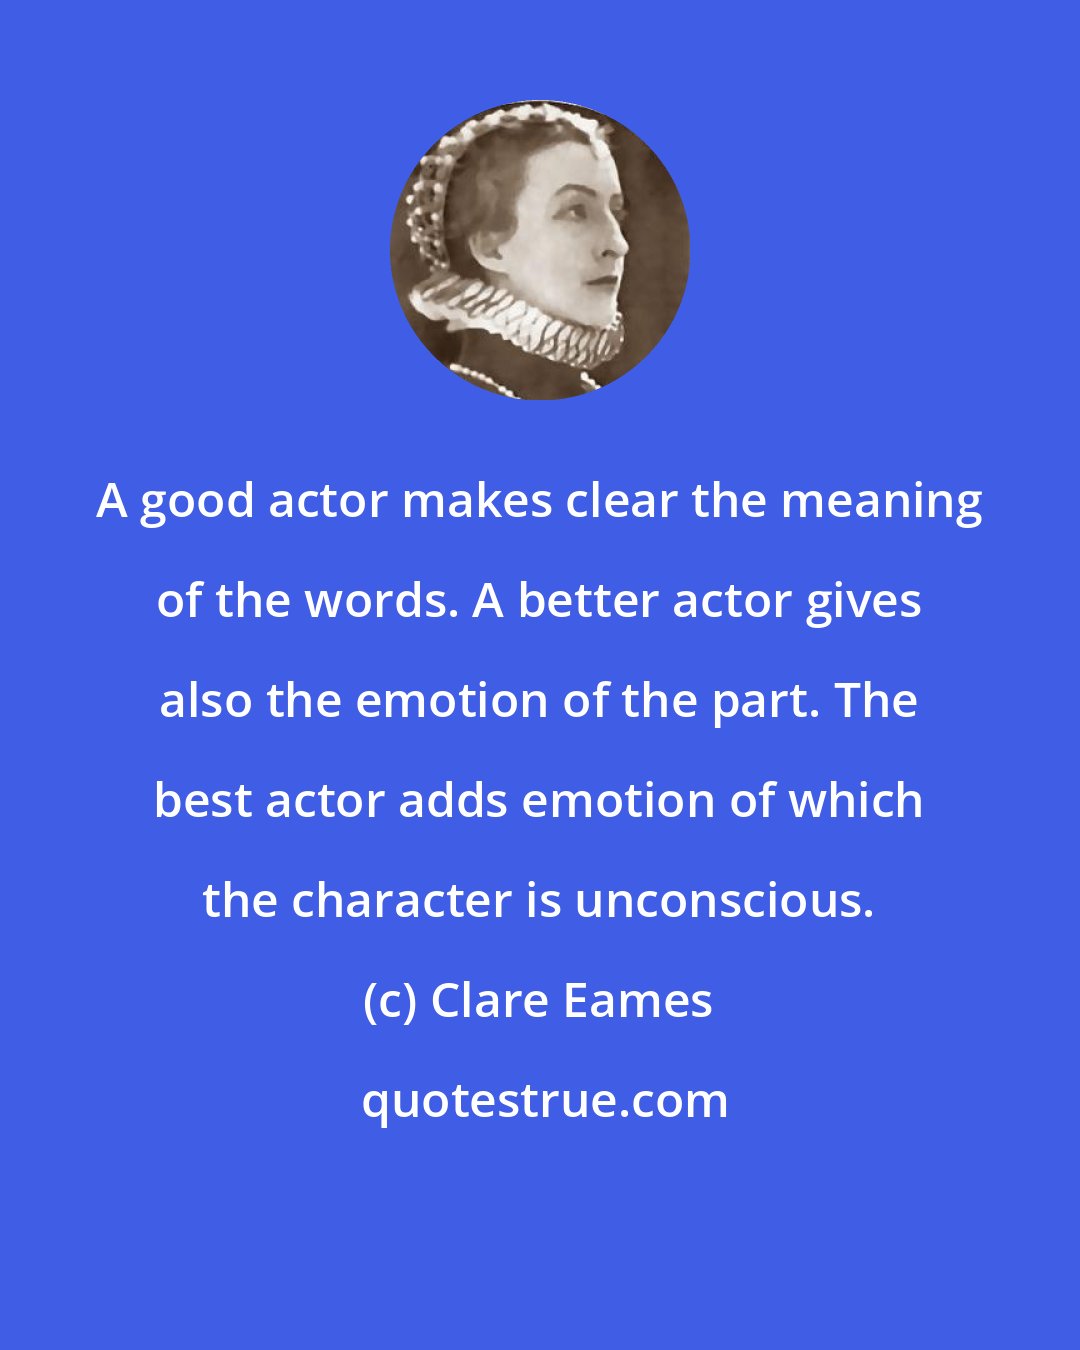 Clare Eames: A good actor makes clear the meaning of the words. A better actor gives also the emotion of the part. The best actor adds emotion of which the character is unconscious.